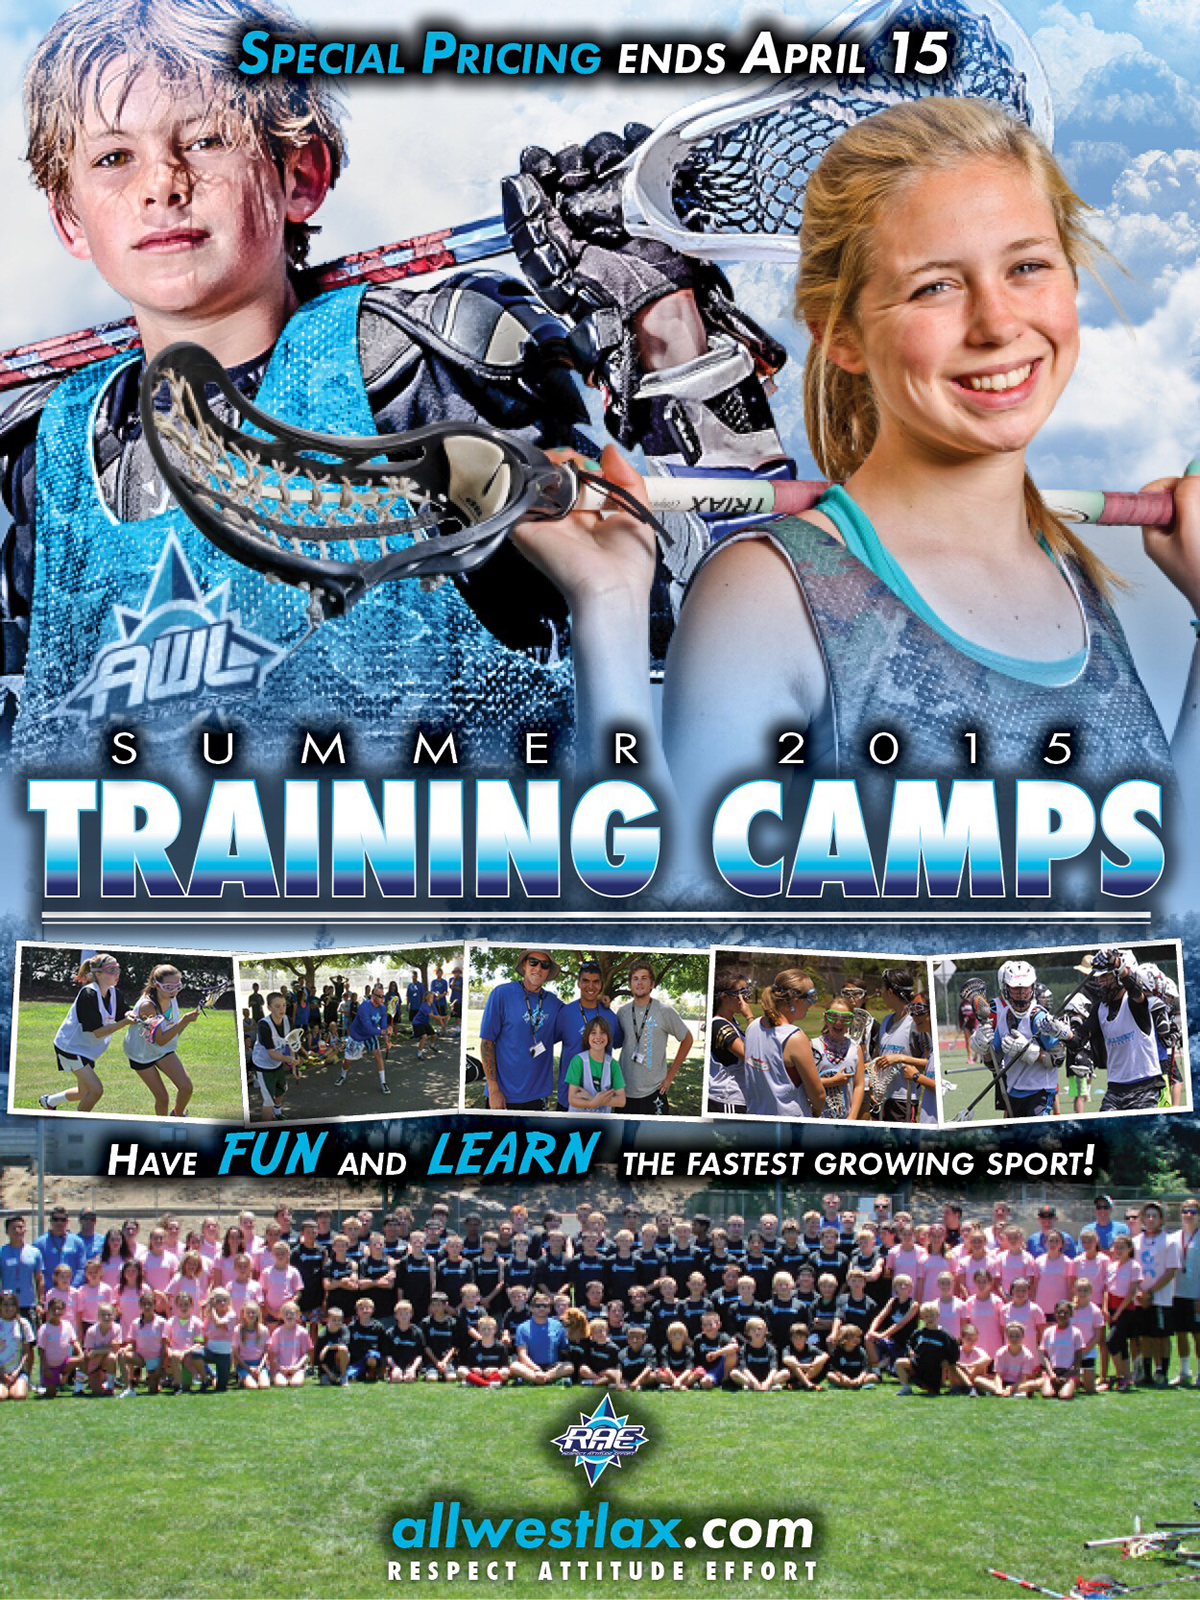 lacrosse LAX norcal northern california bay area sports Camps summer camps boys girls youth